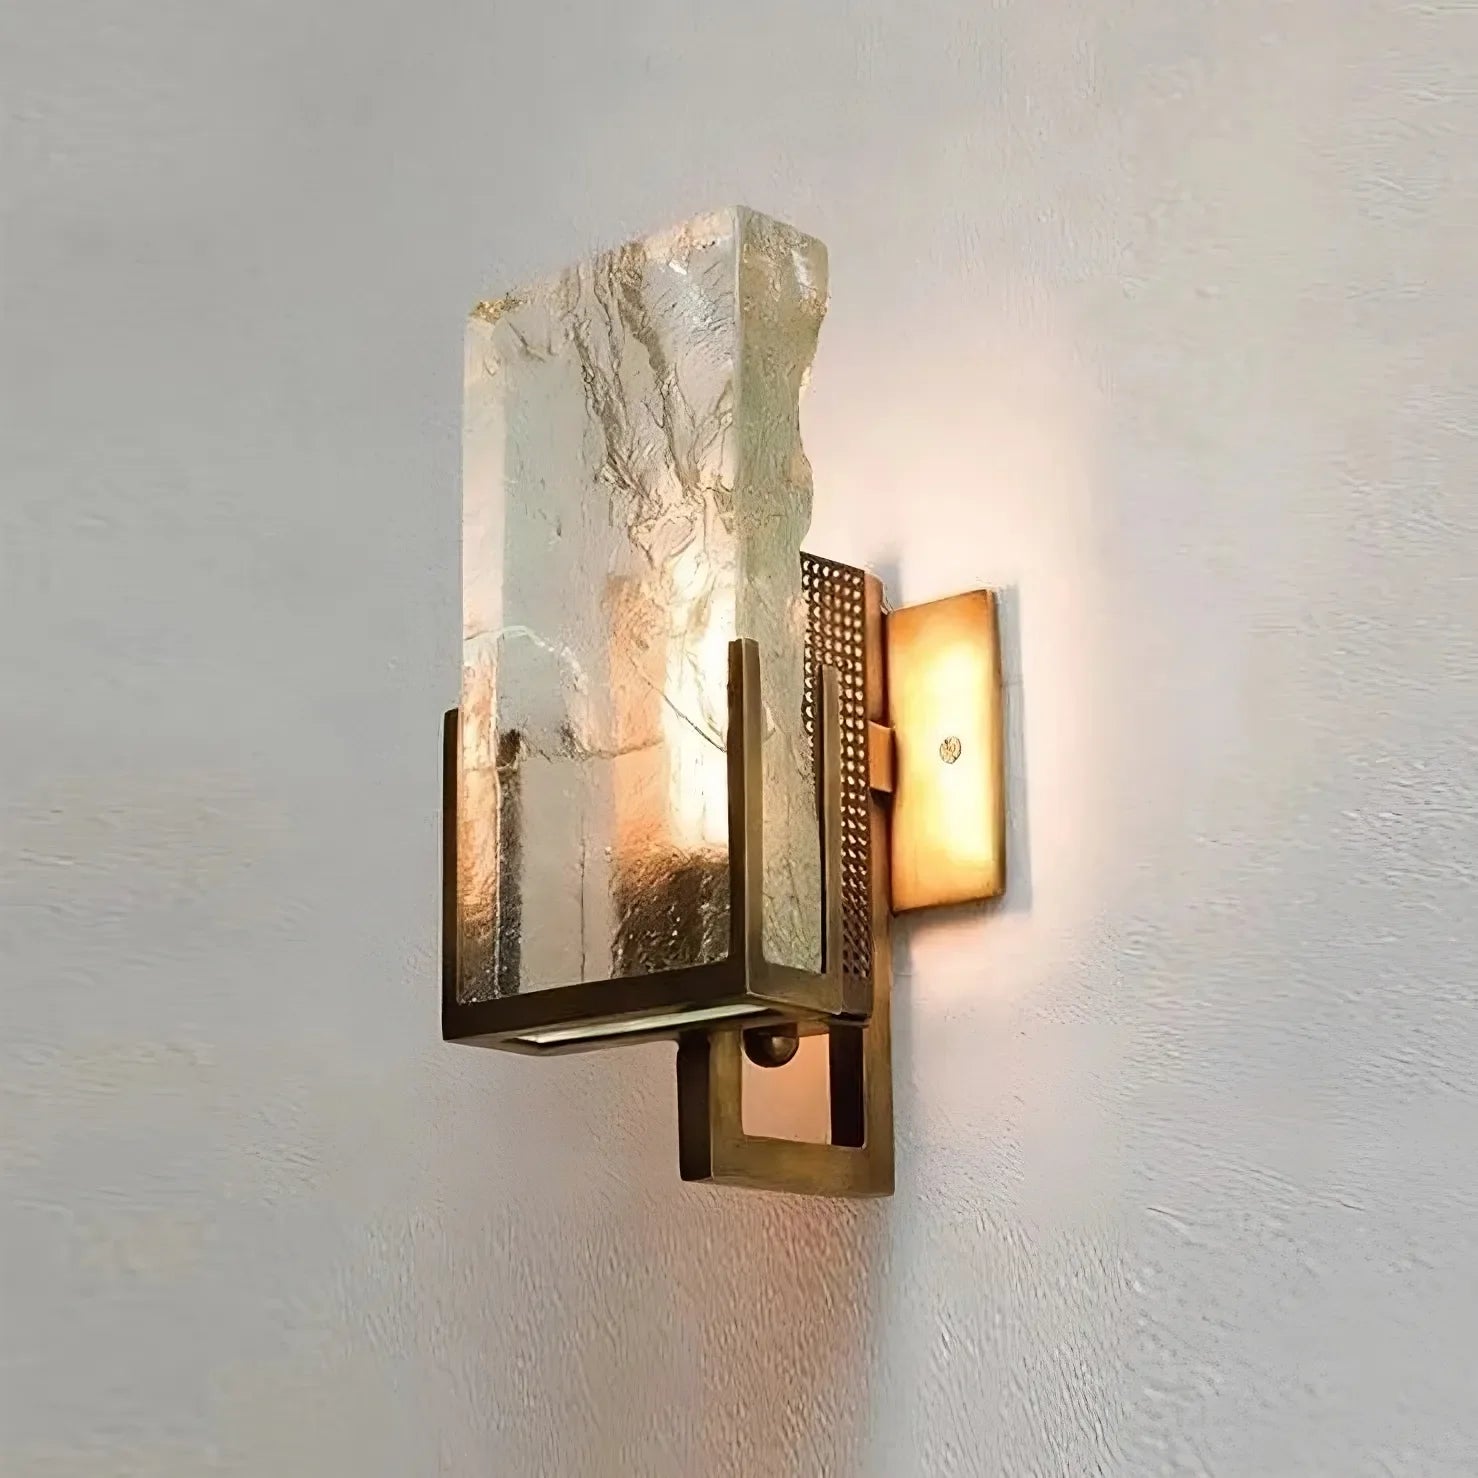 crystal wall sconce in an interior